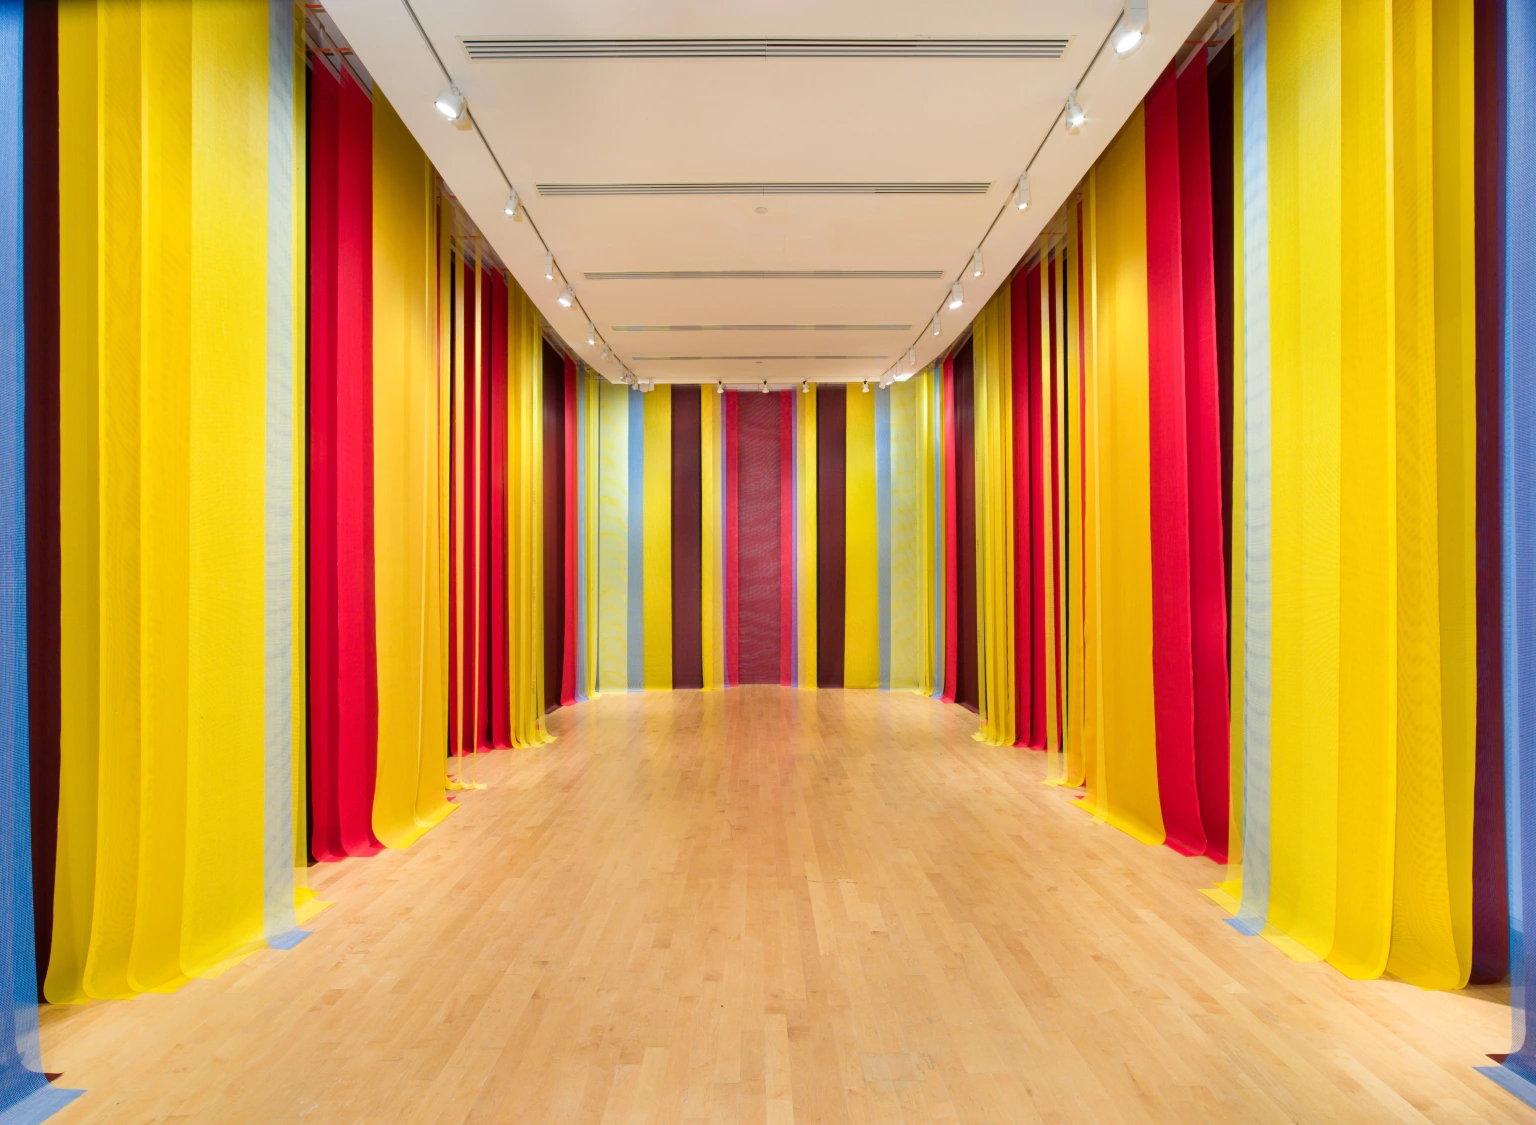 Art gallery installation of multi-colored vertical strips of fabric